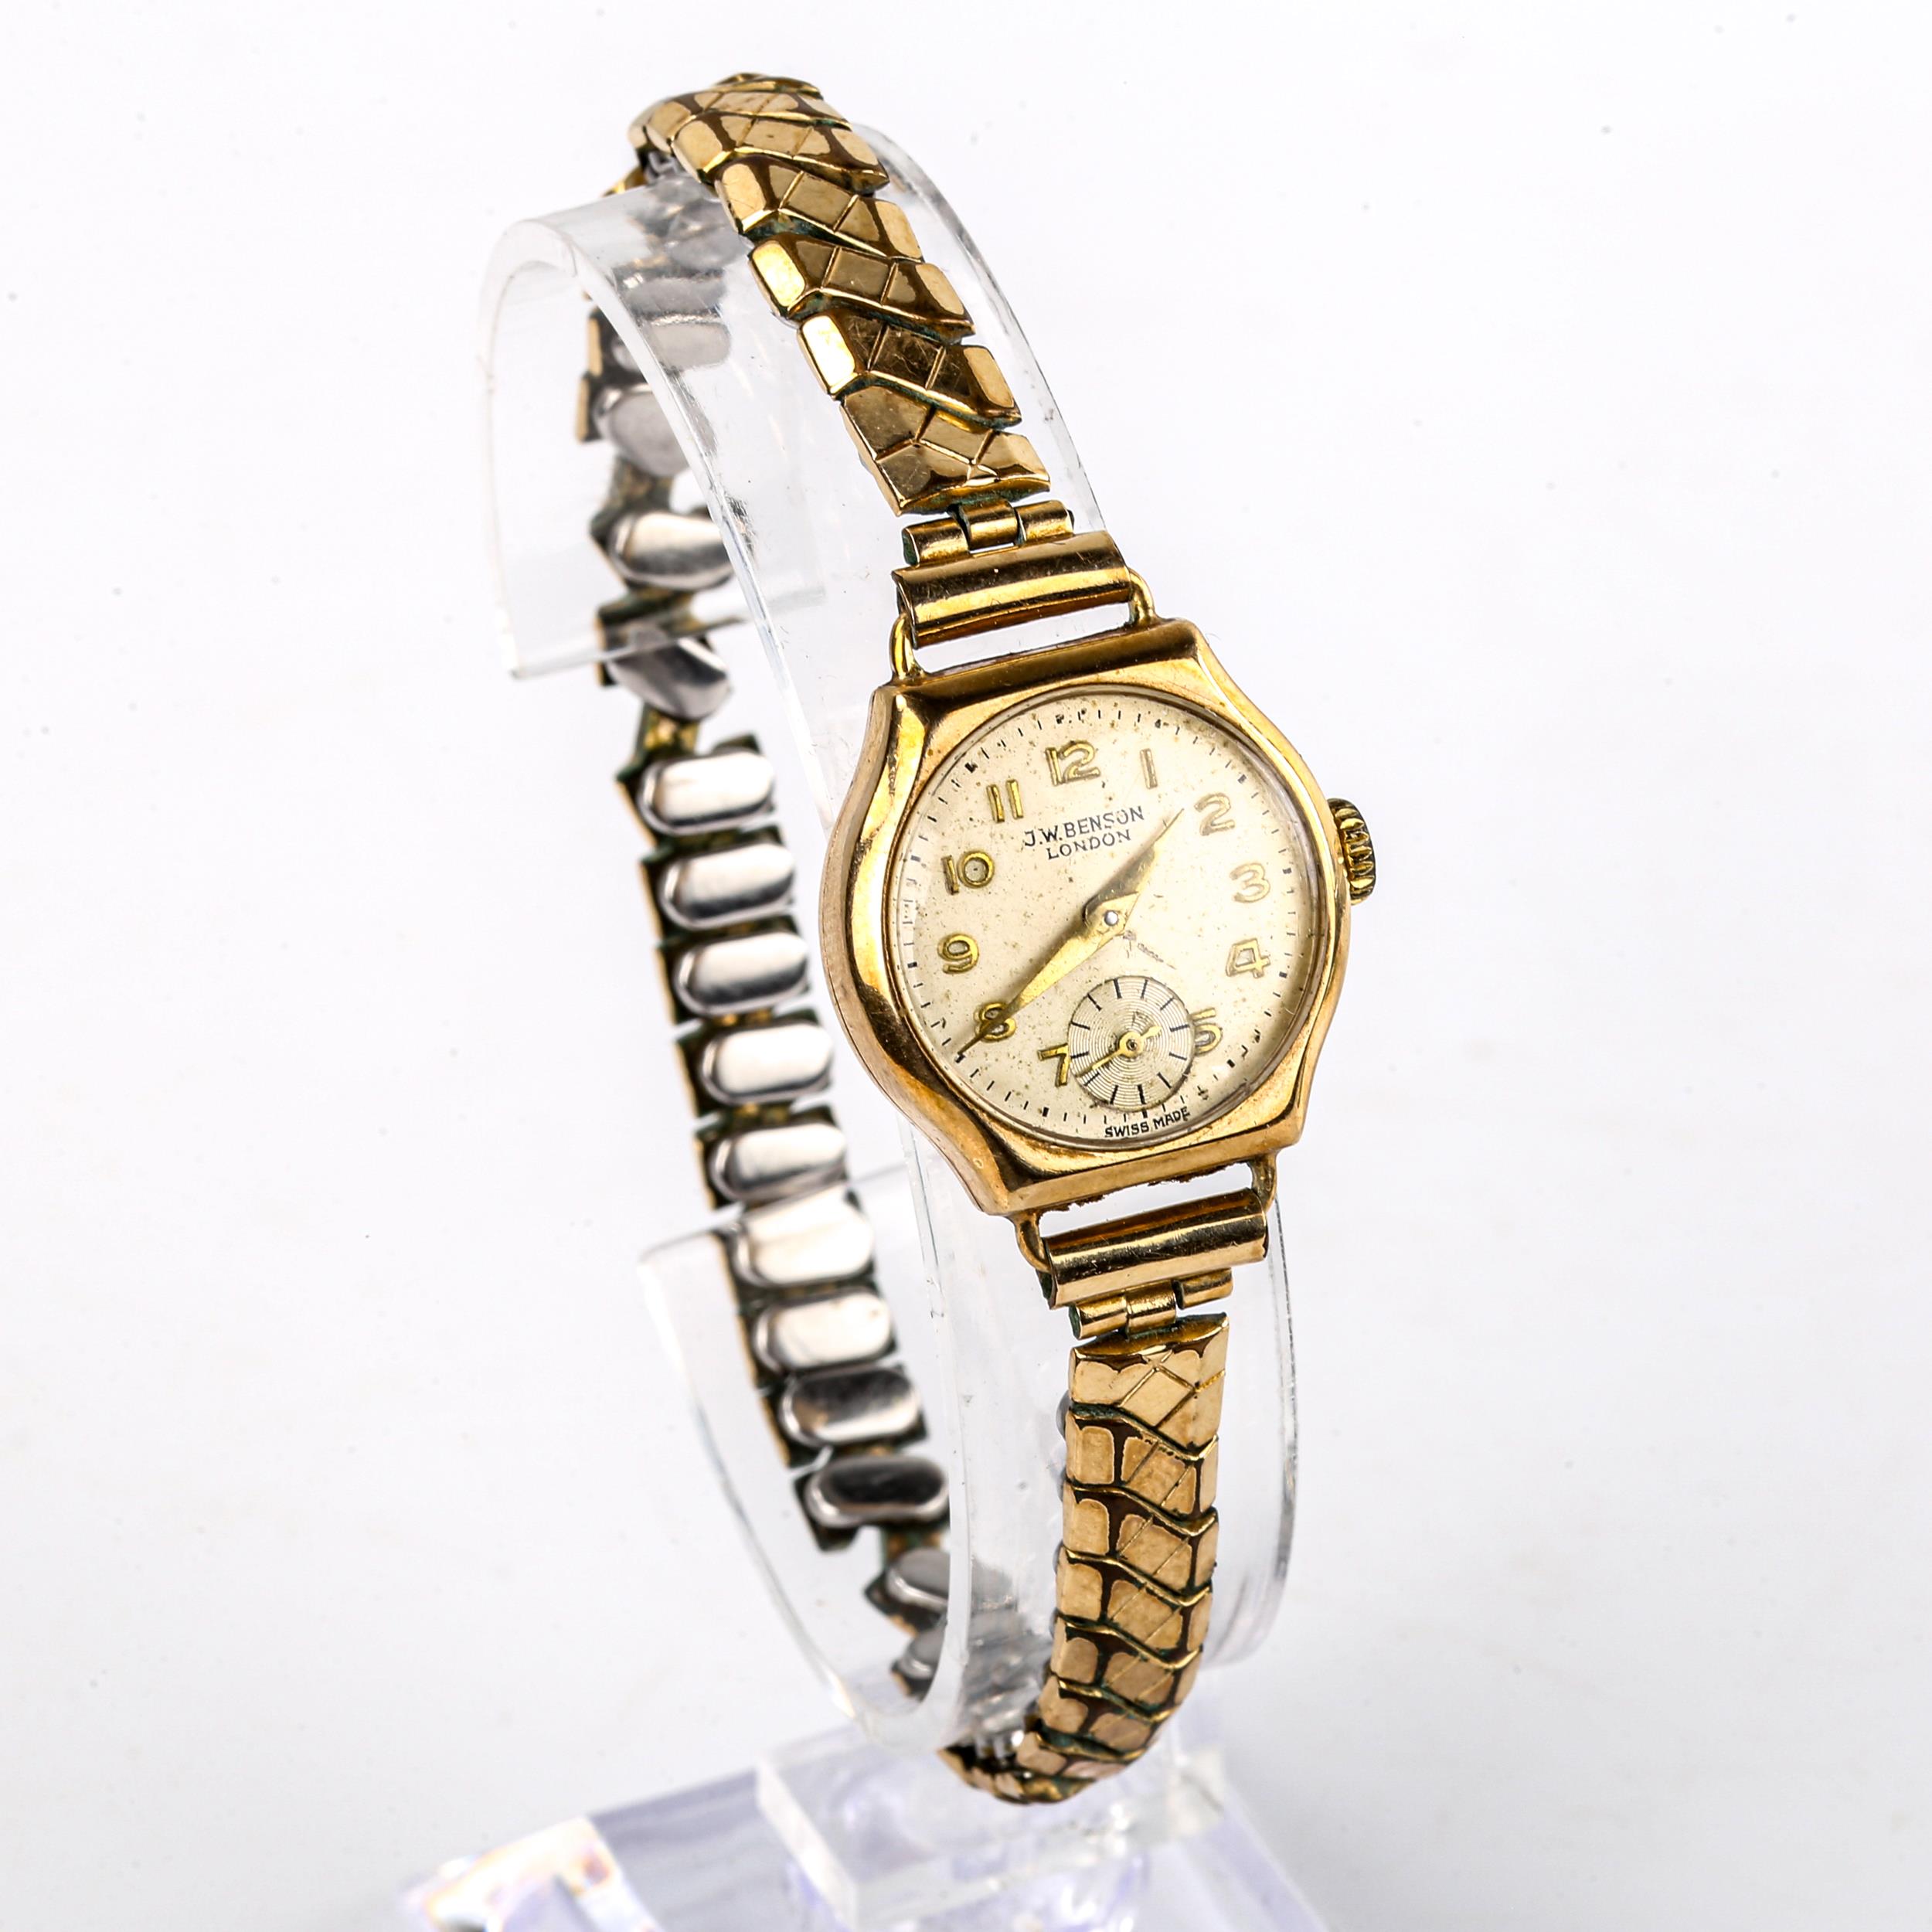 J W BENSON - a lady's Vintage 9ct gold mechanical bracelet watch, ref. 87757, silvered dial with - Image 2 of 5